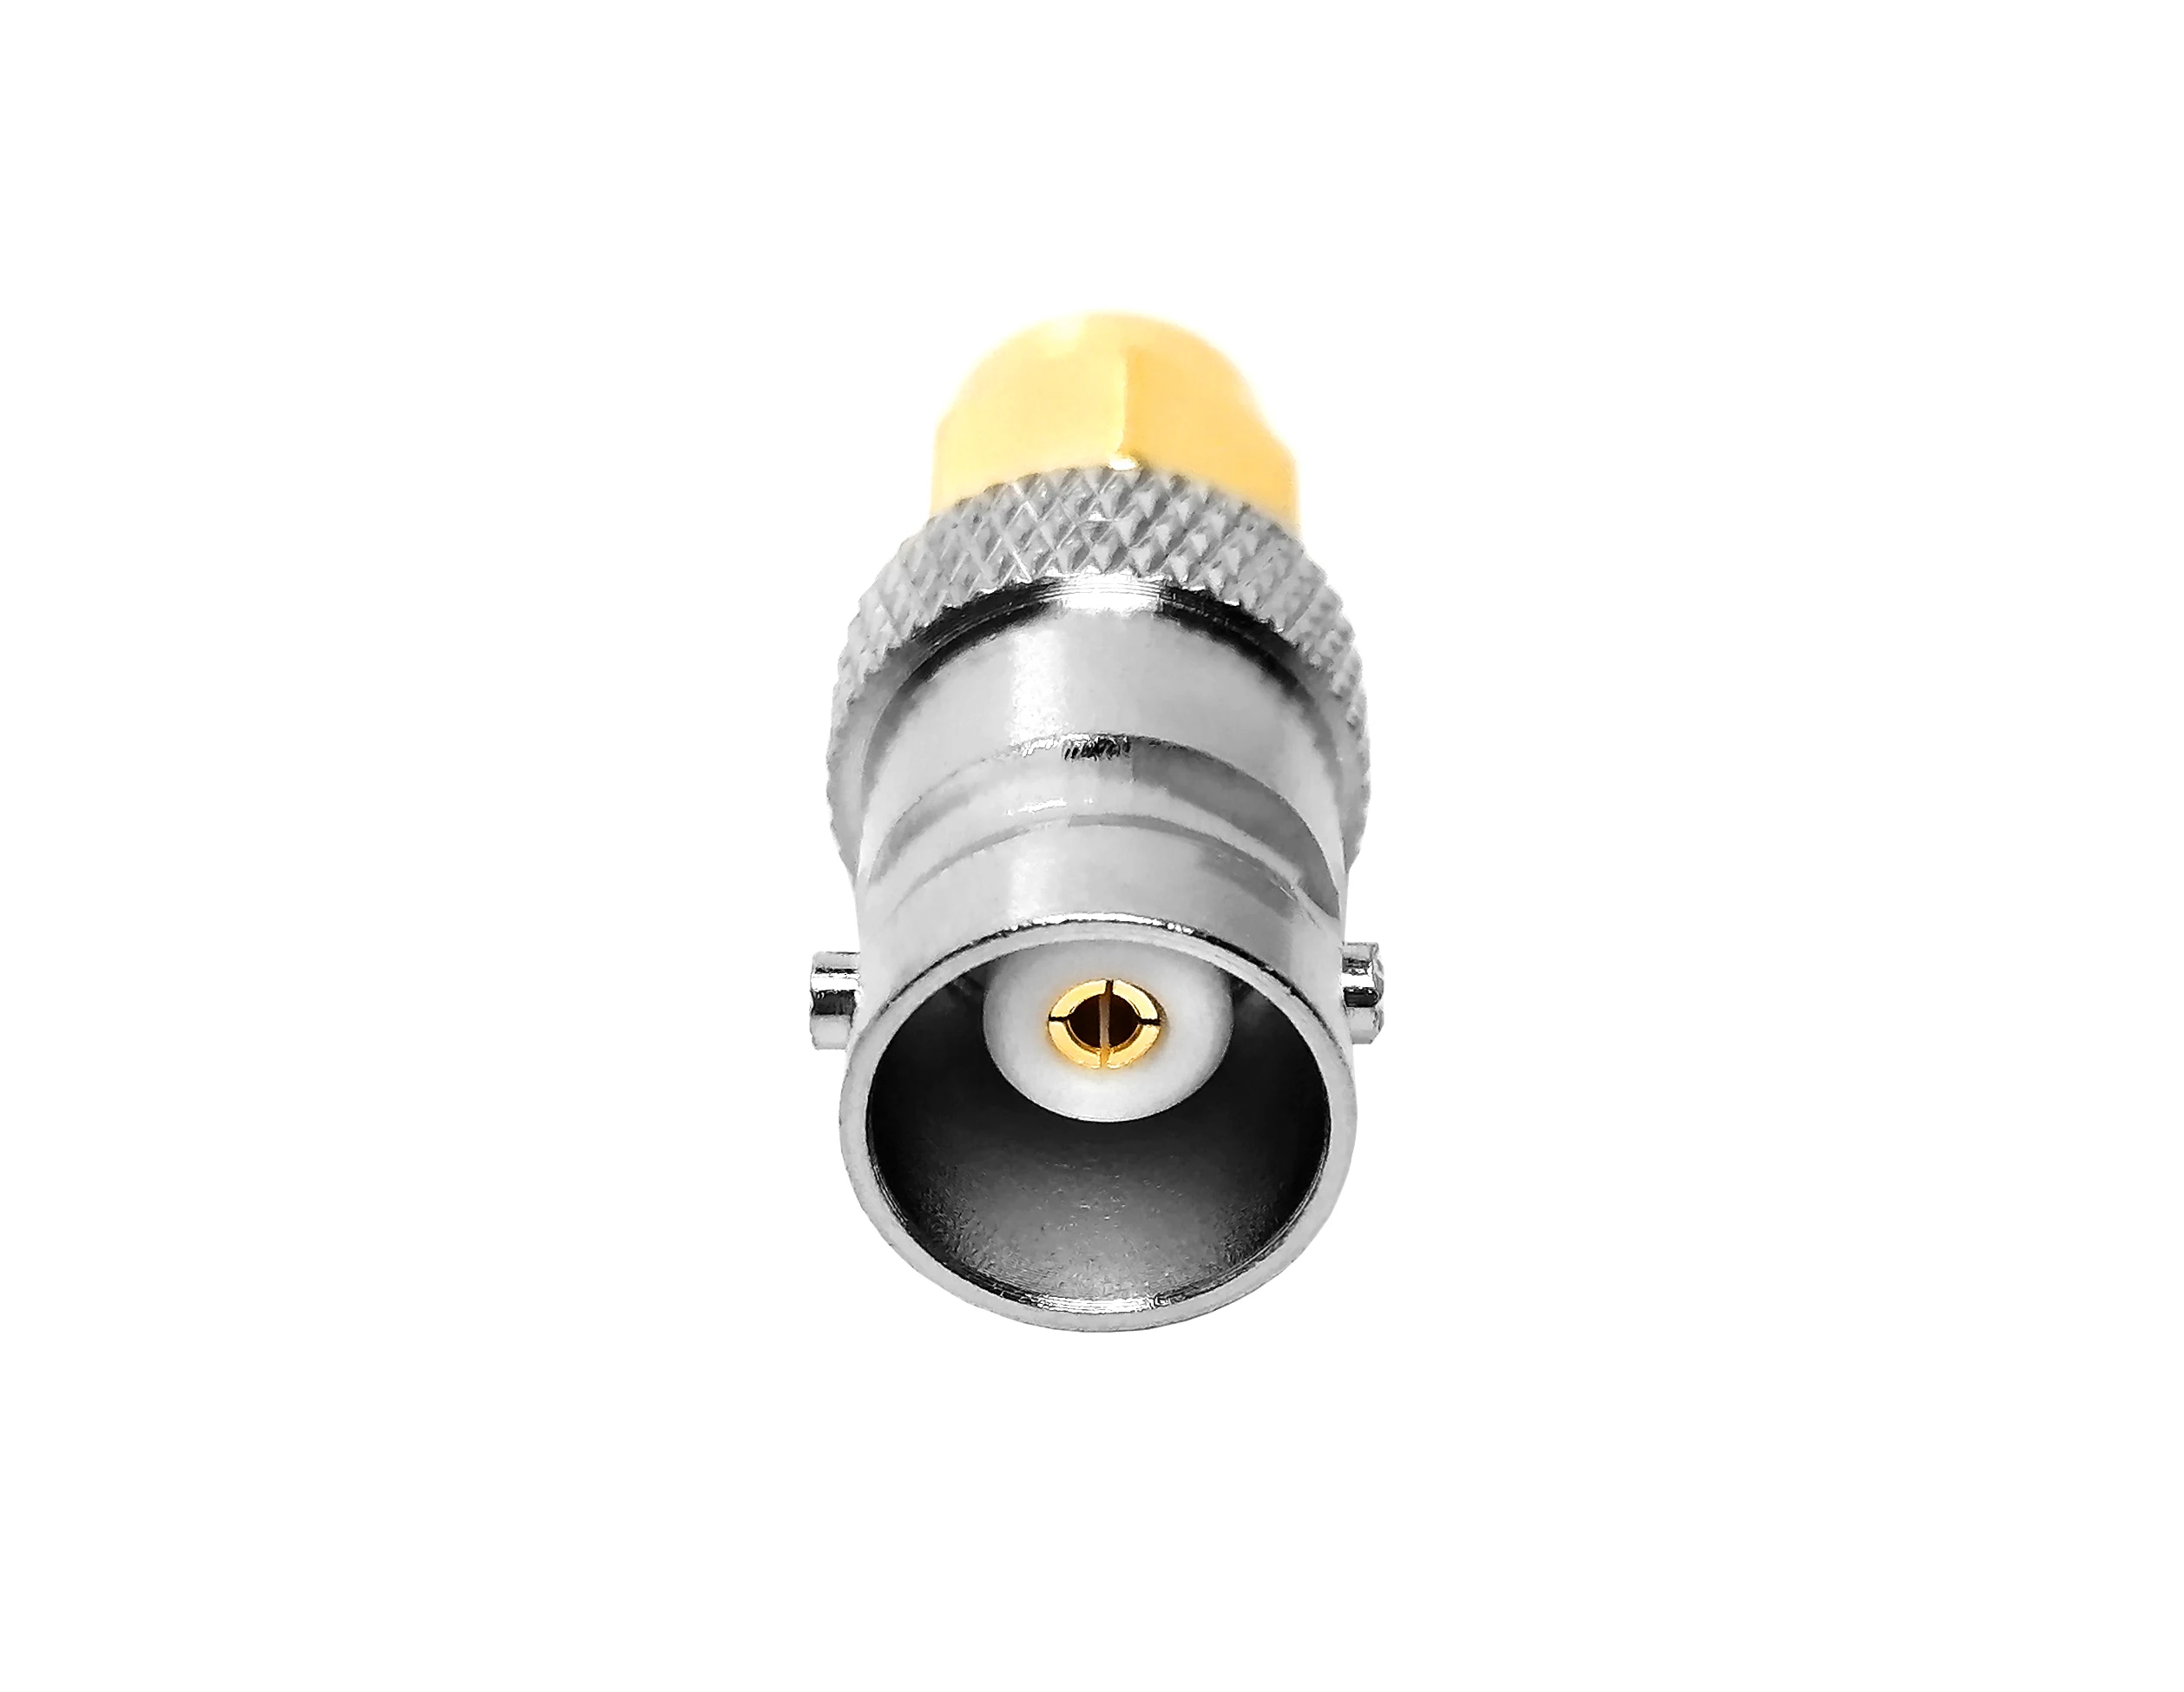 Adaptor Reverse polarity sma female jack to bnc male plug rf coaxial connector adapter supplier